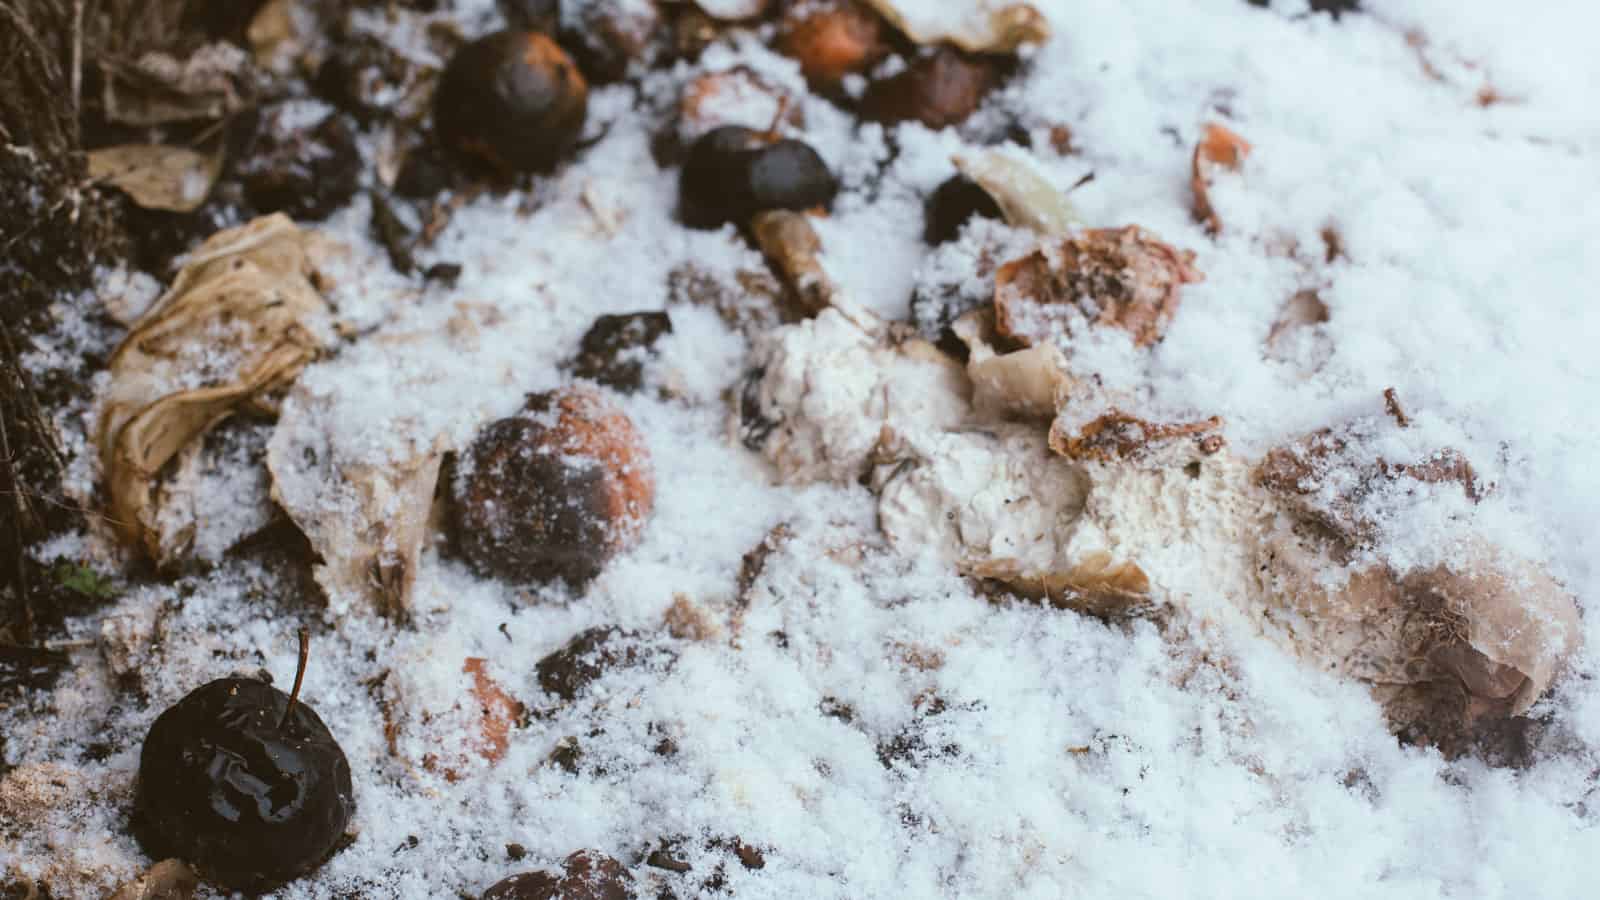 Composted leaves covered in snow